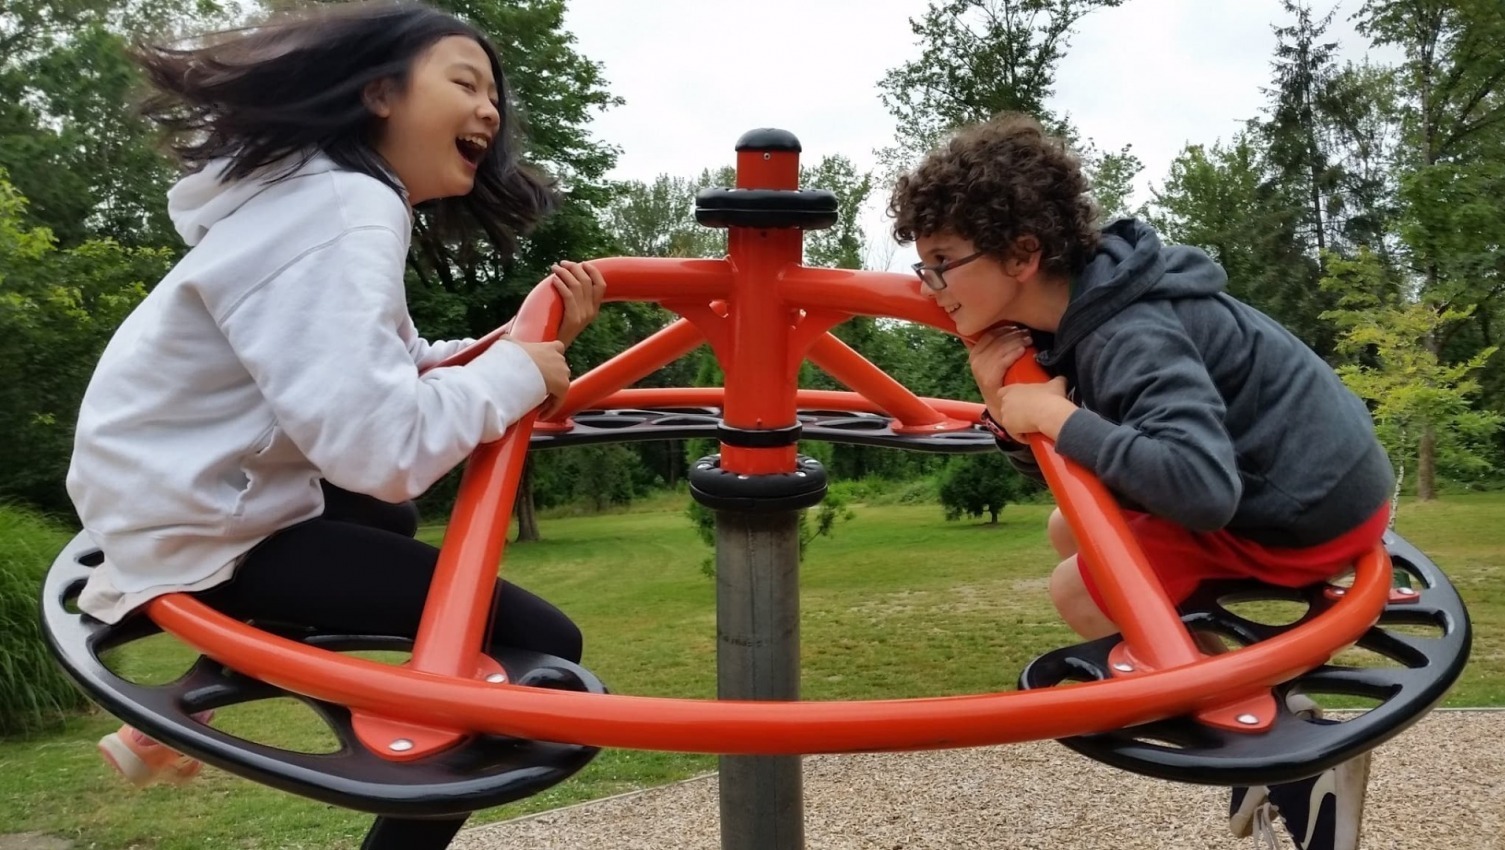 A girl and a boy having fun at the playground